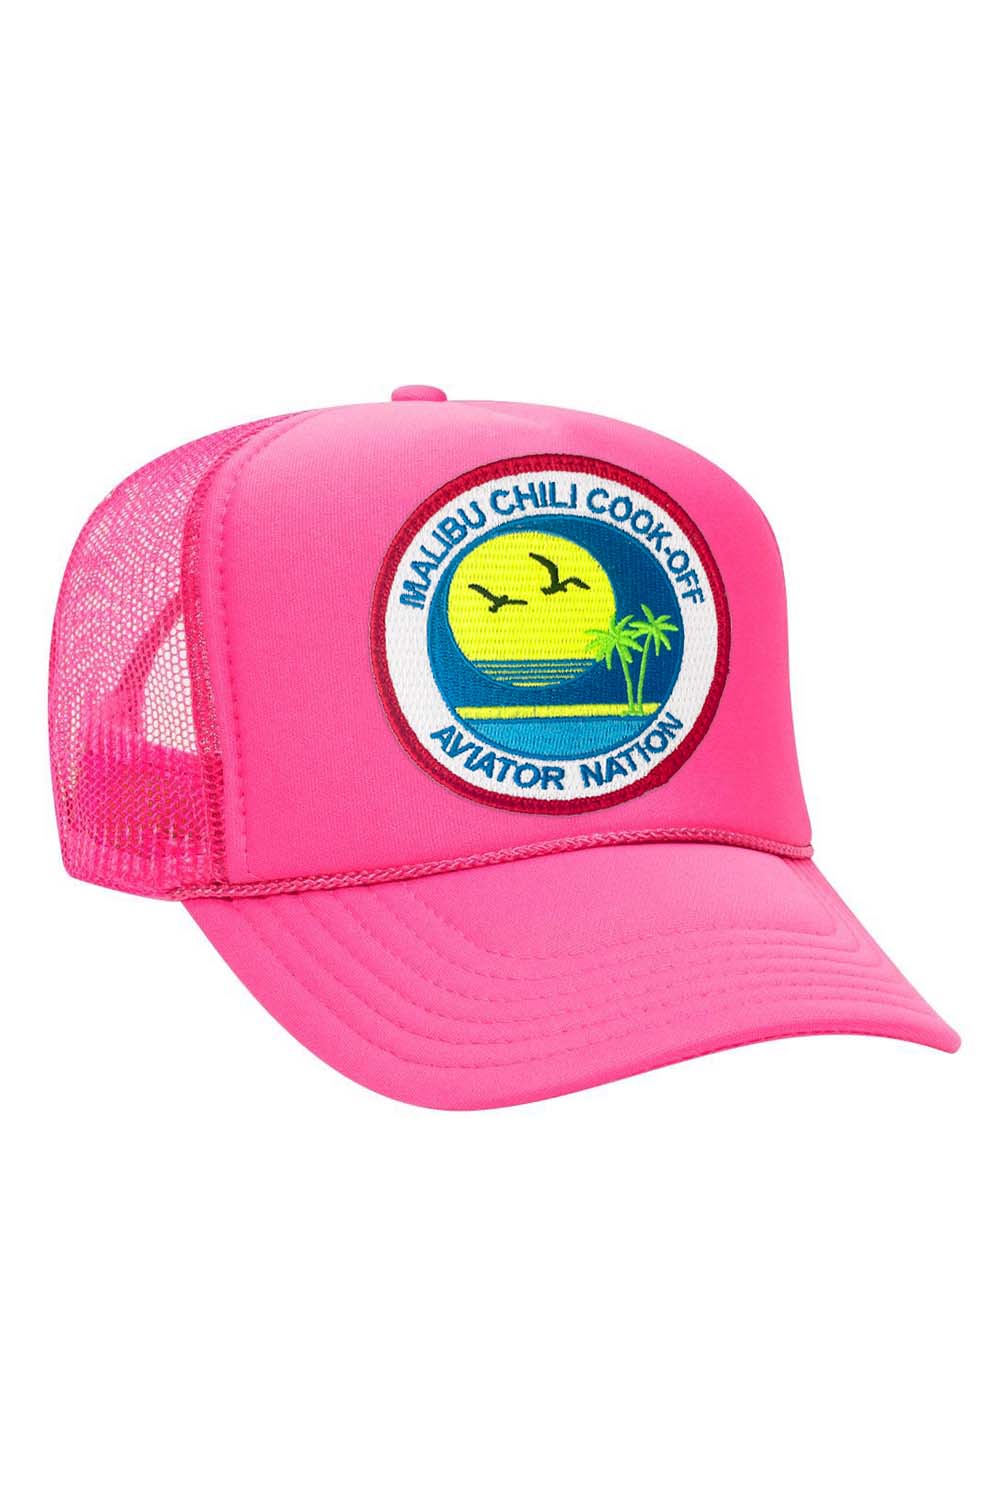 MALIBU CHILI COOK-OFF 2023 VINTAGE LOW RISE TRUCKER HATS Aviator Nation NEON PINK 